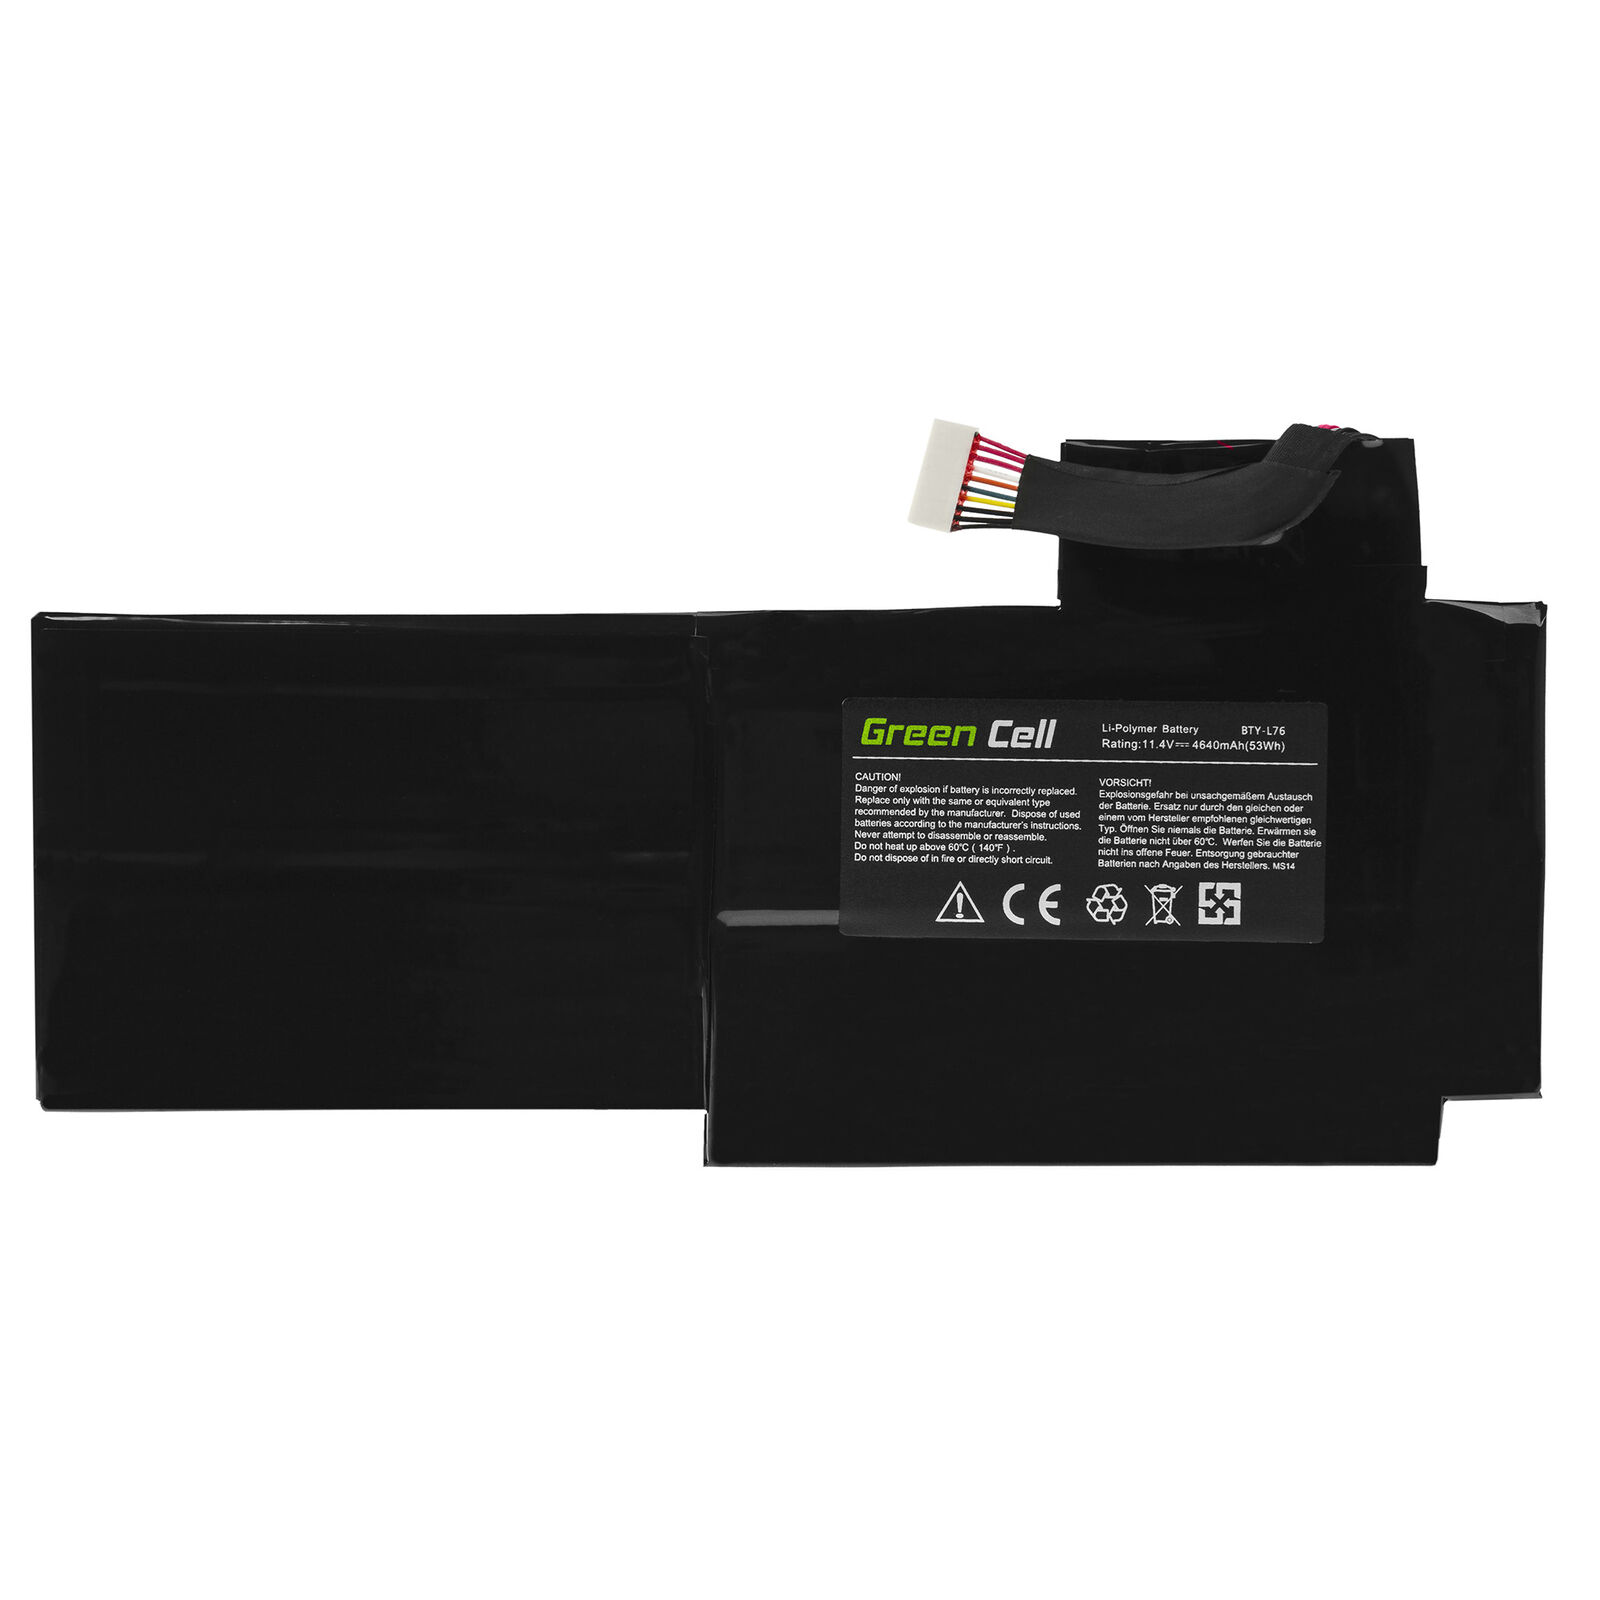 BTY-L76 MSI GS70 MS-1771/1772/1774 XMG C703 compatible battery